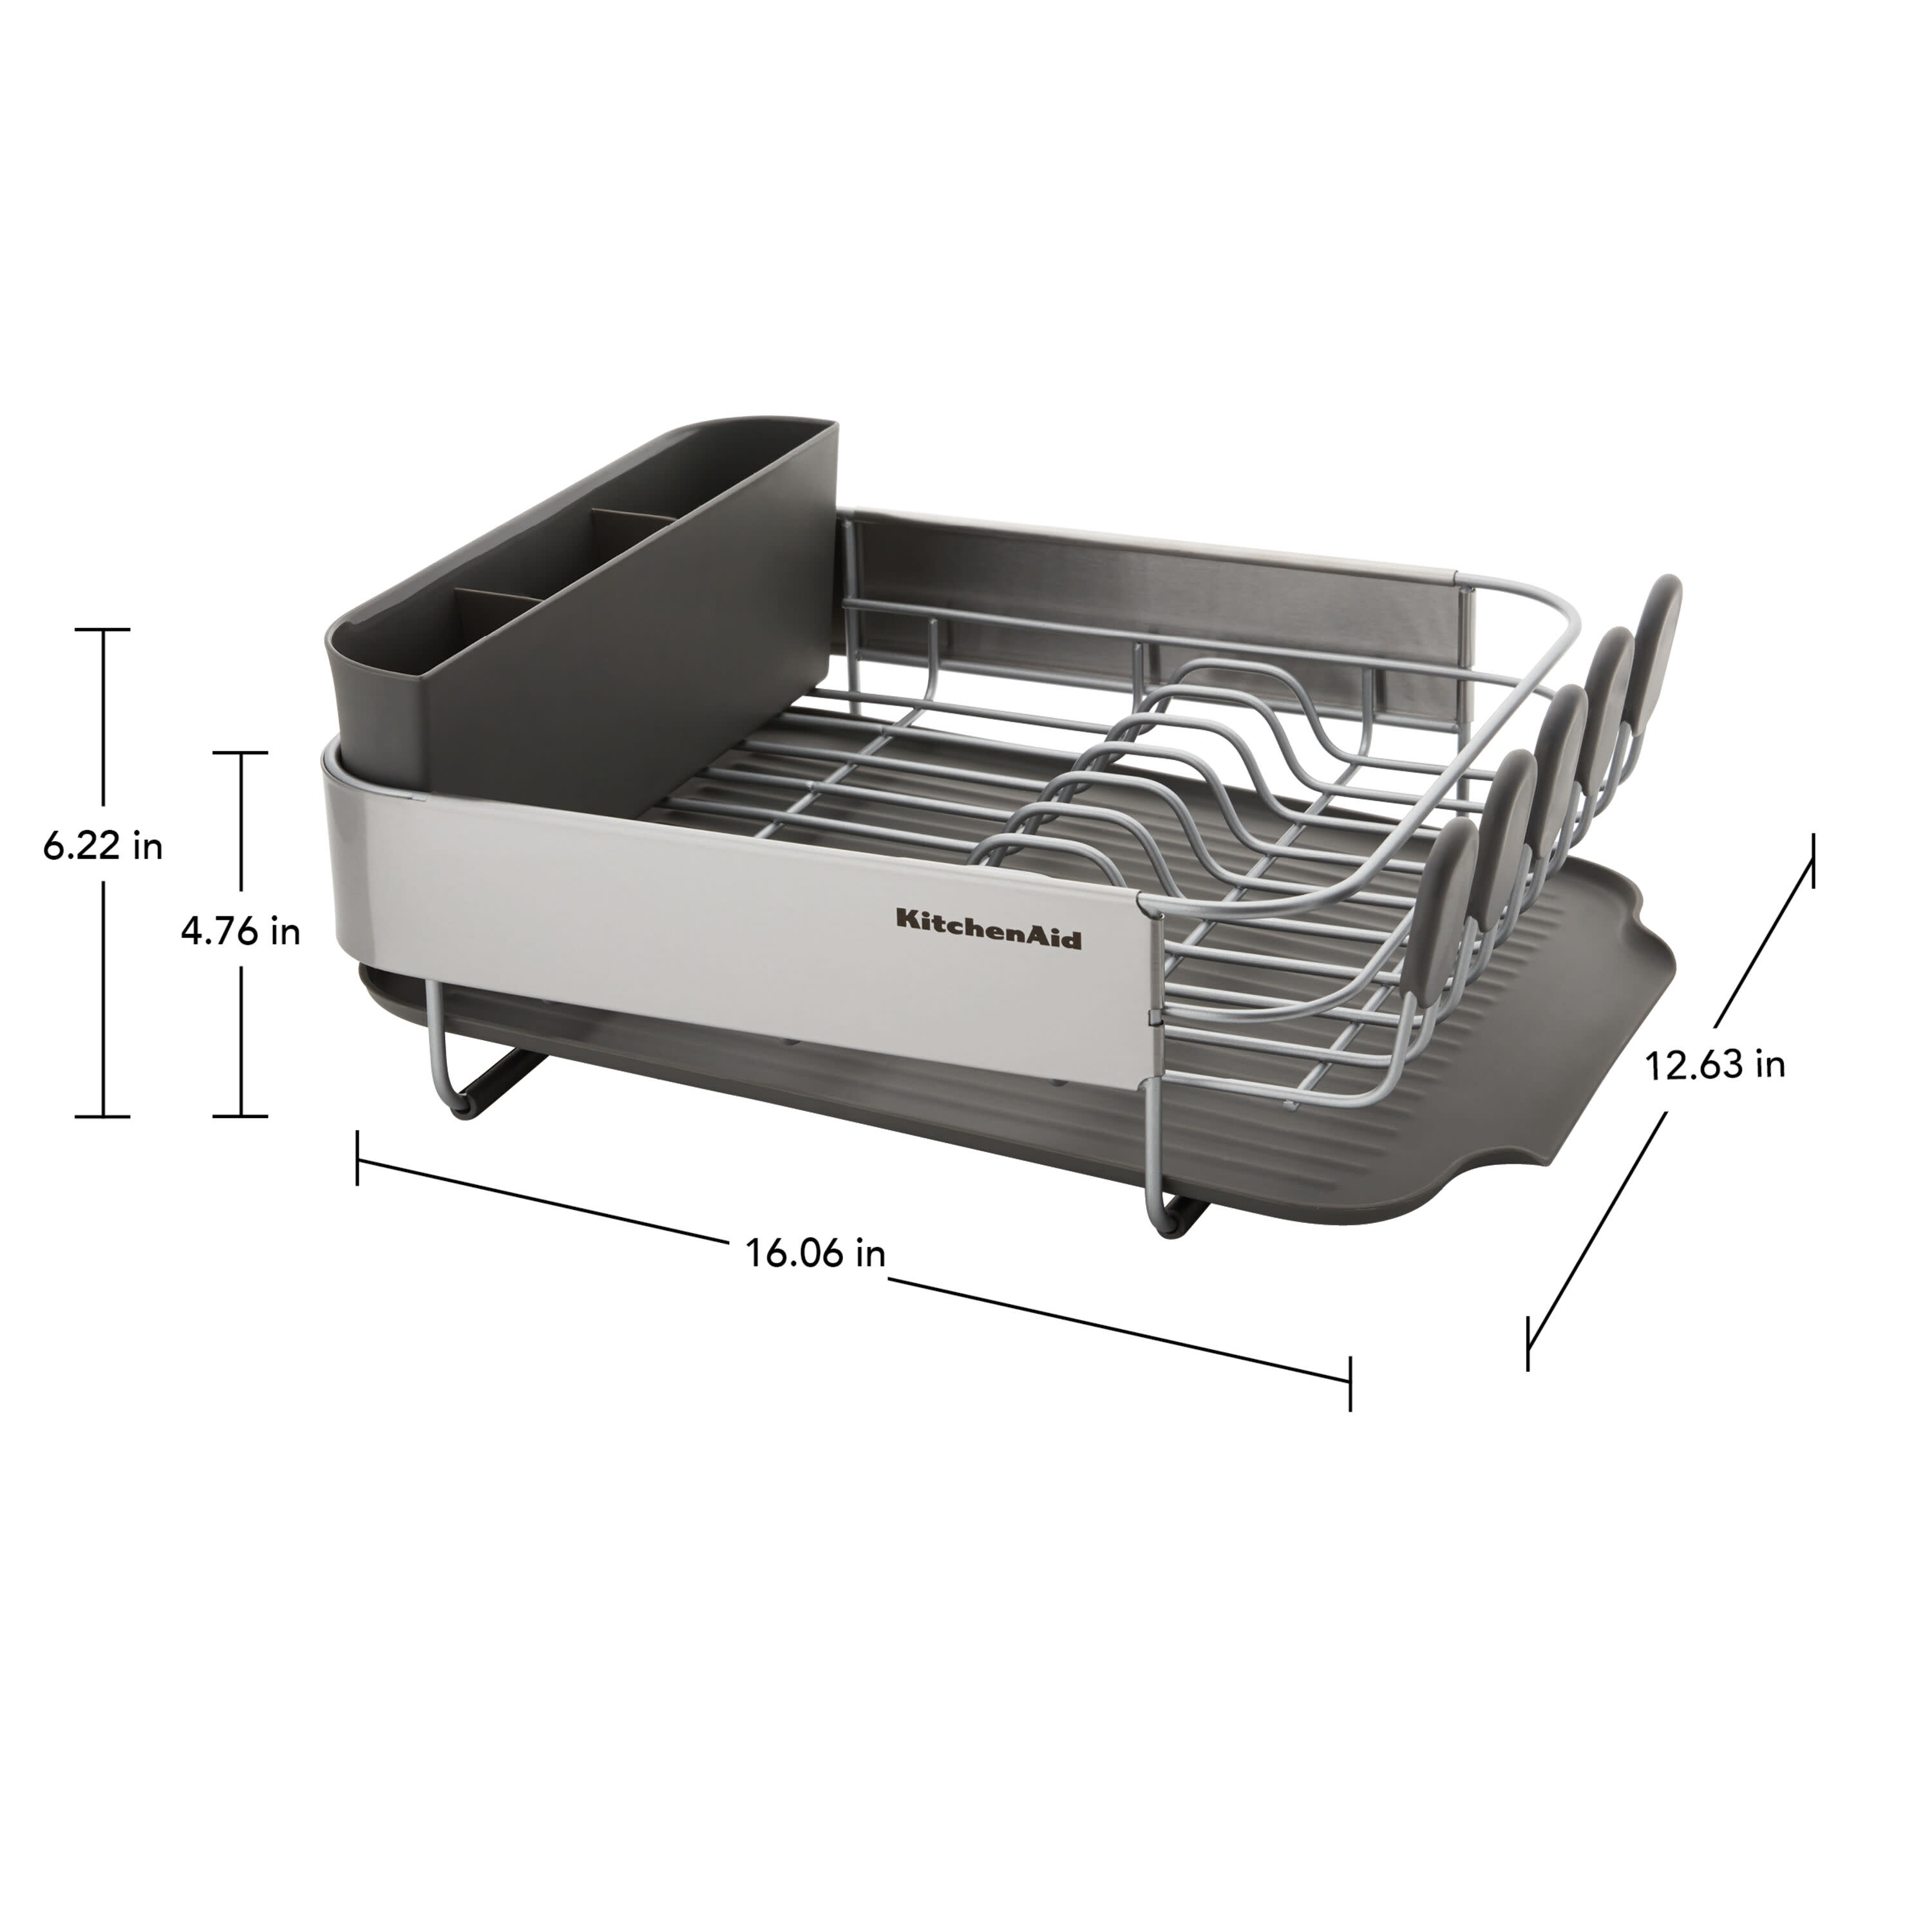 Kitchenaid Stainless Steel Wrap Compact Dish Rack in Satin Gray - image 7 of 9